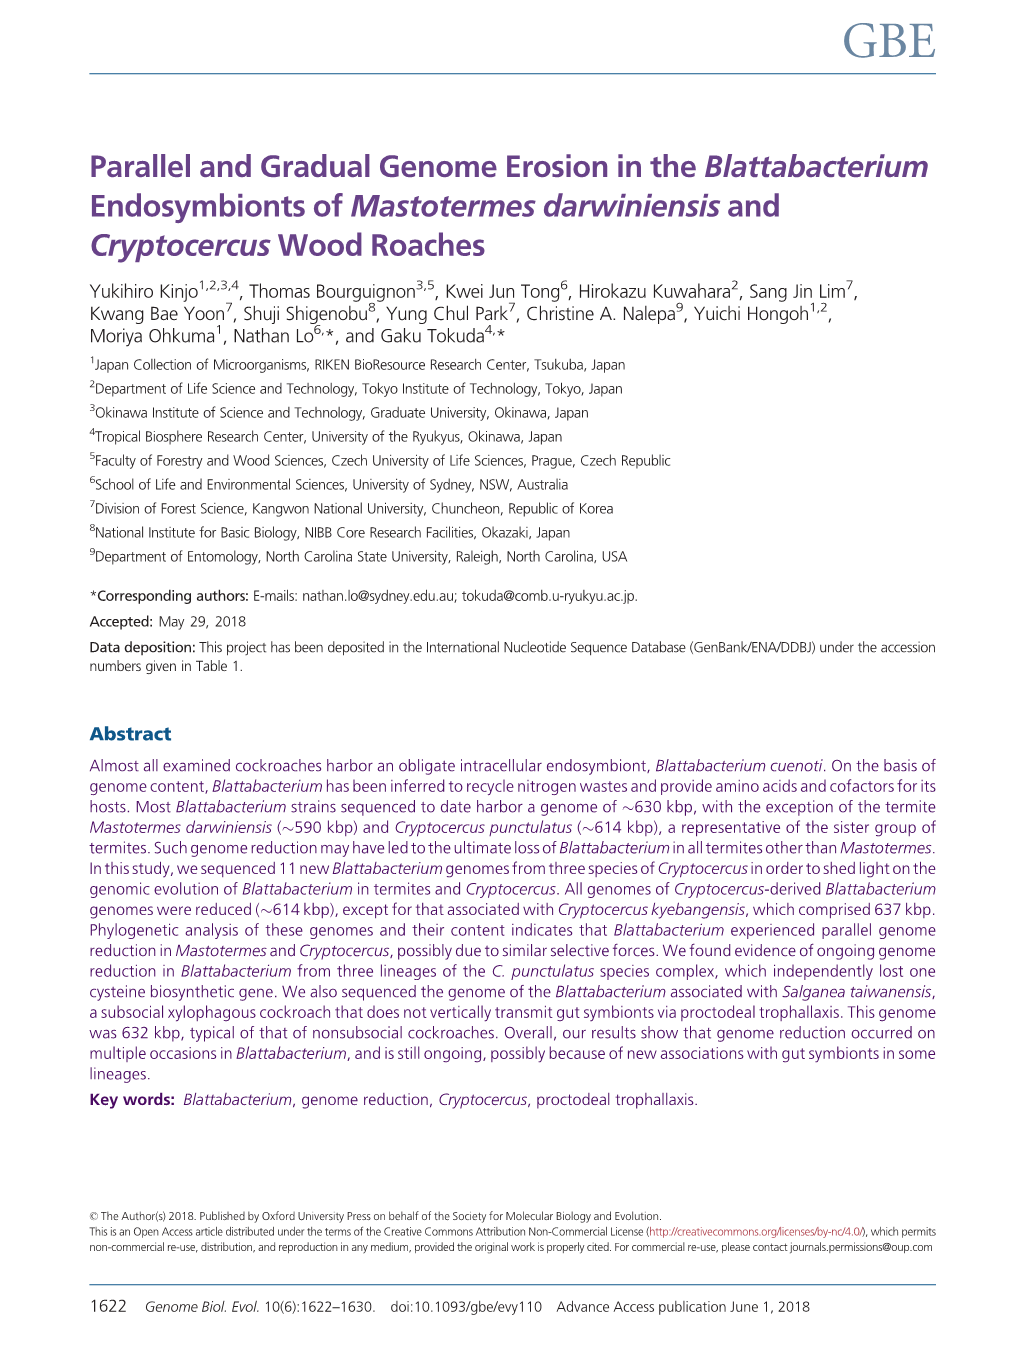 Parallel and Gradual Genome Erosion in the Blattabacterium Endosymbionts of Mastotermes Darwiniensis and Cryptocercus Wood Roaches